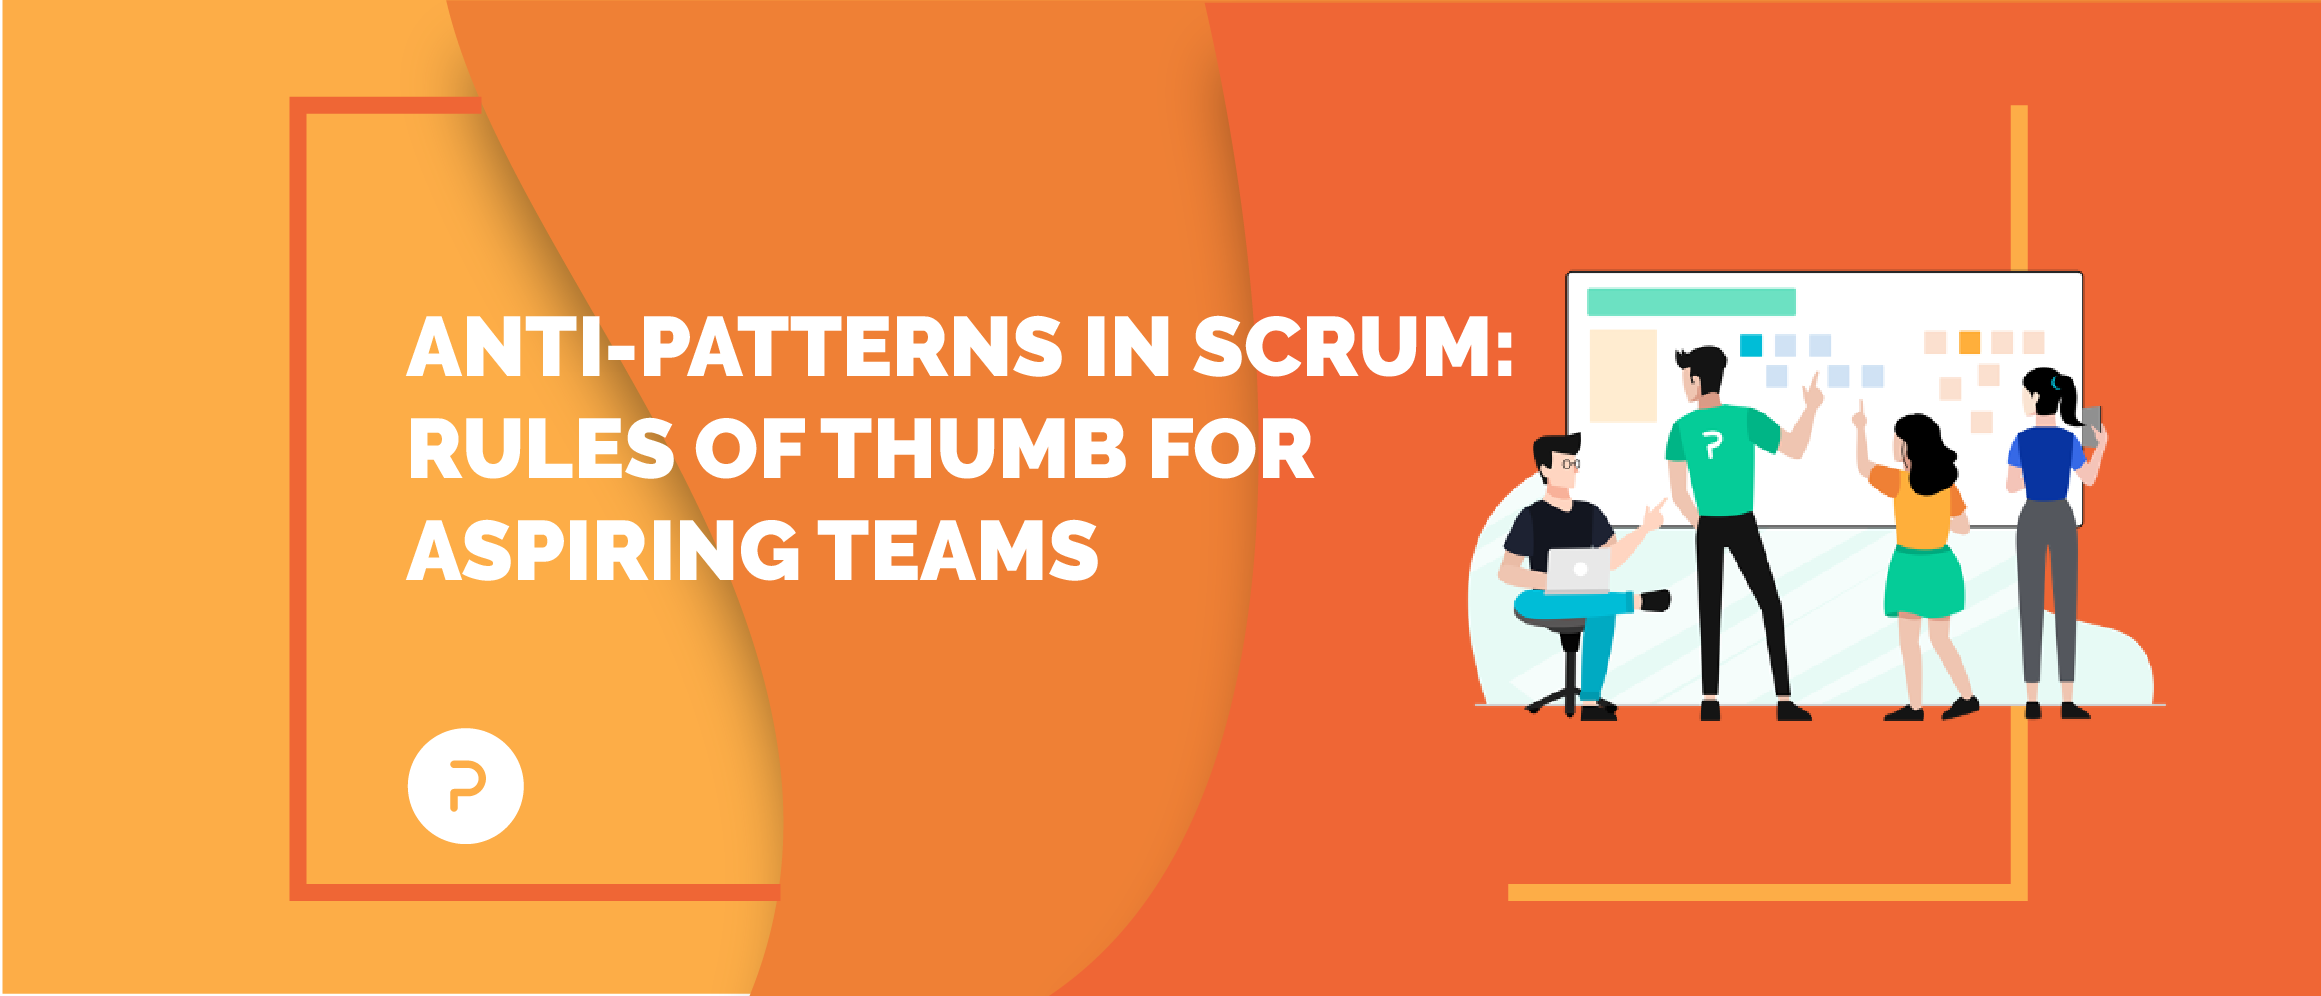 Common anti-patterns in SCRUM: Rules of thumb for aspiring teams